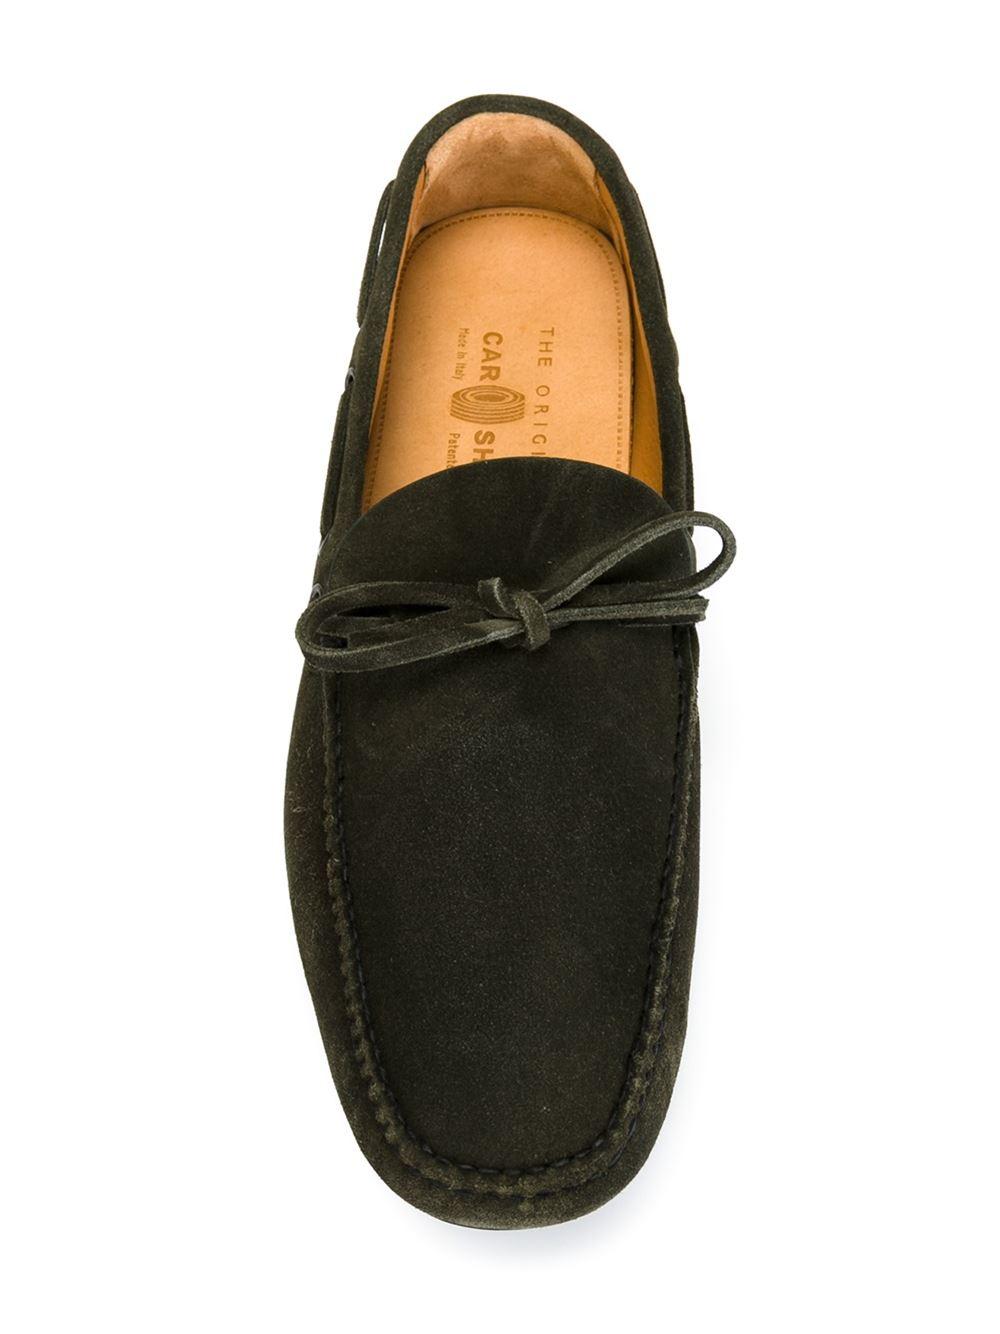 Lyst - Car shoe Suede Loafers in Green for Men